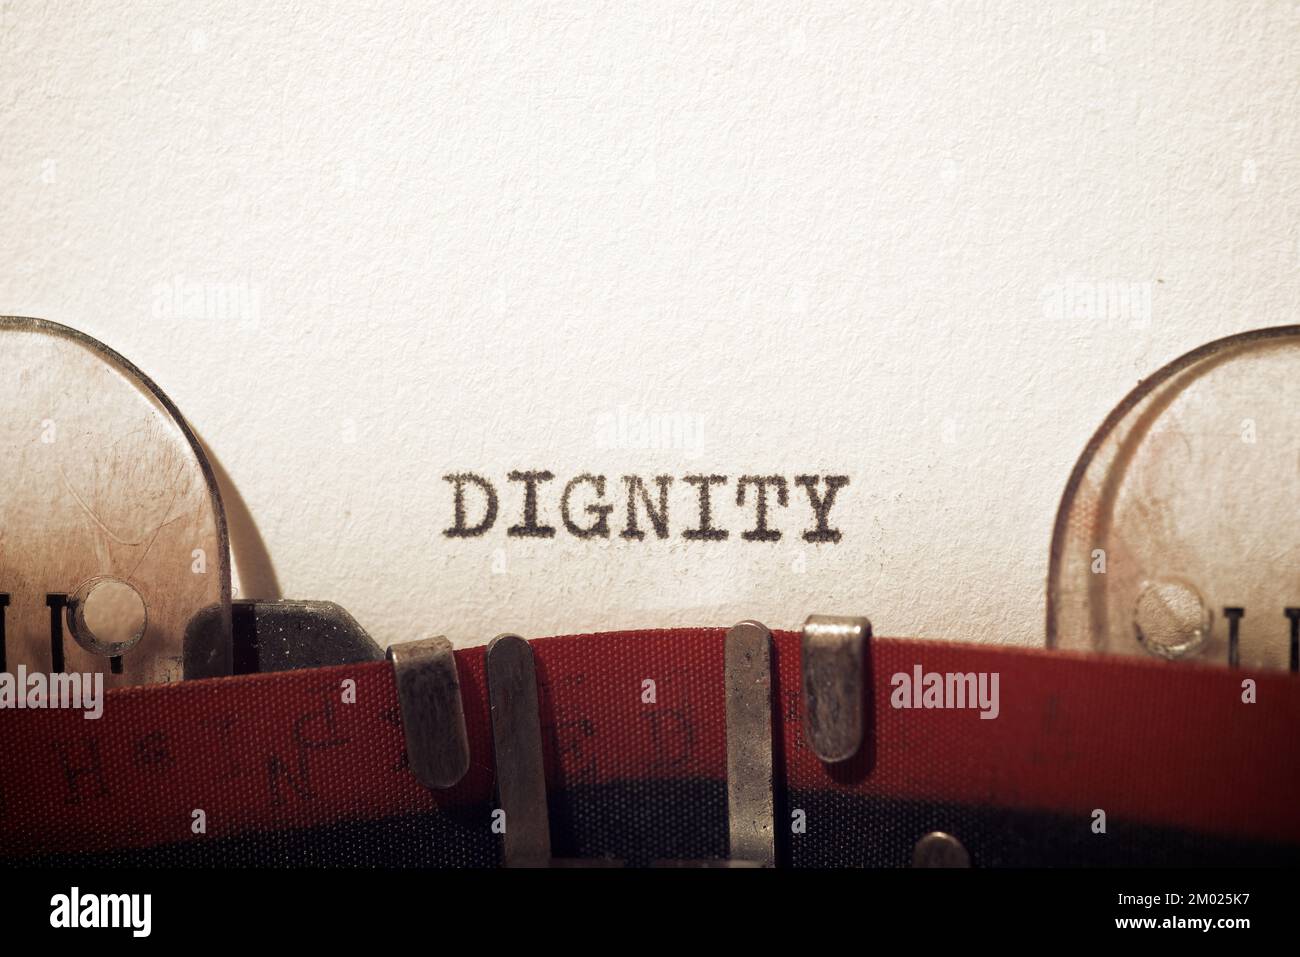 Dignity text written with a typewriter. Stock Photo